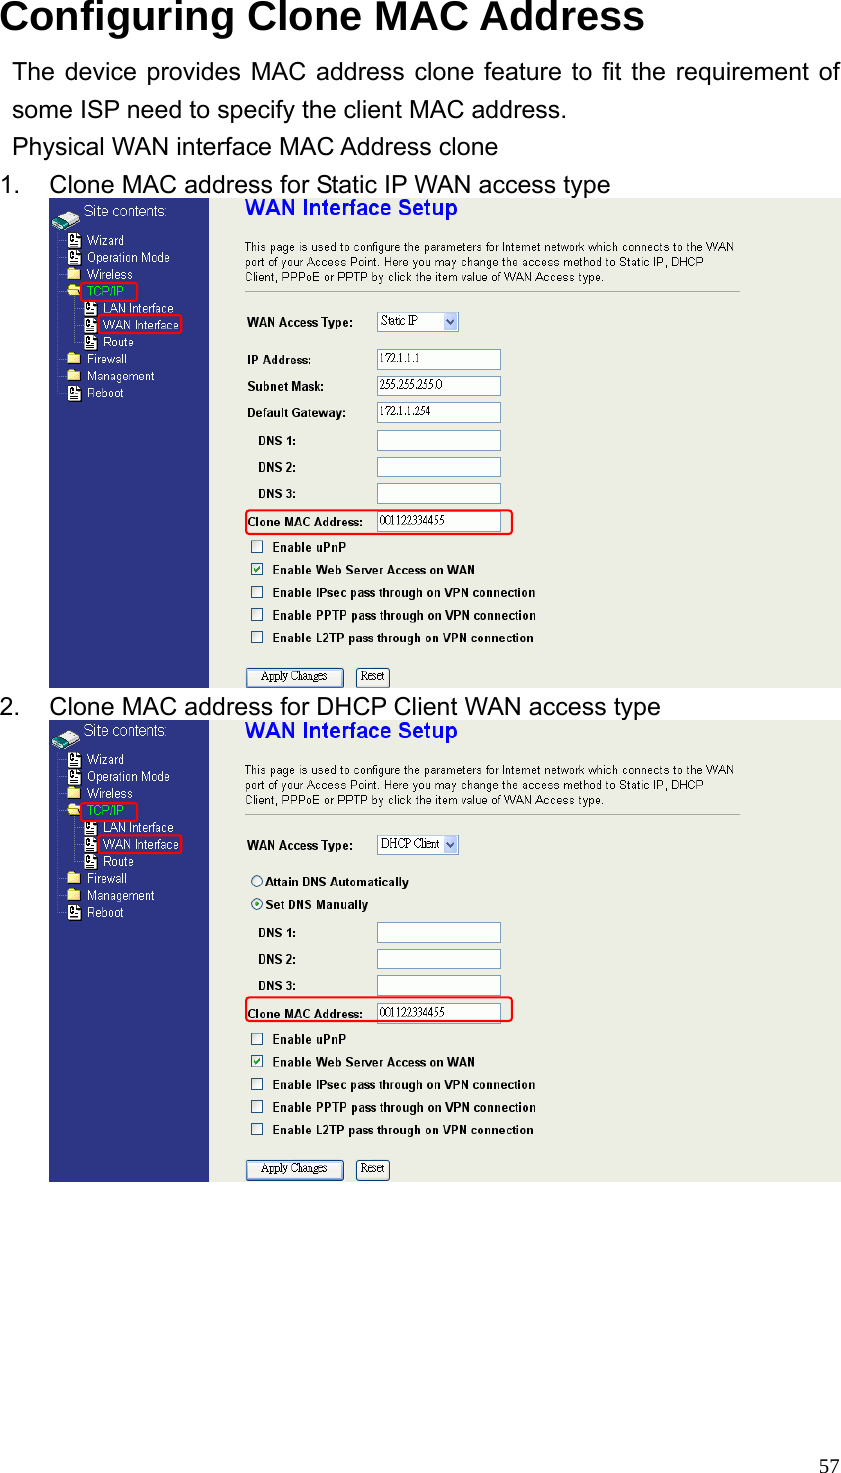  57Configuring Clone MAC Address The device provides MAC address clone feature to fit the requirement of some ISP need to specify the client MAC address. Physical WAN interface MAC Address clone 1.  Clone MAC address for Static IP WAN access type  2.  Clone MAC address for DHCP Client WAN access type         